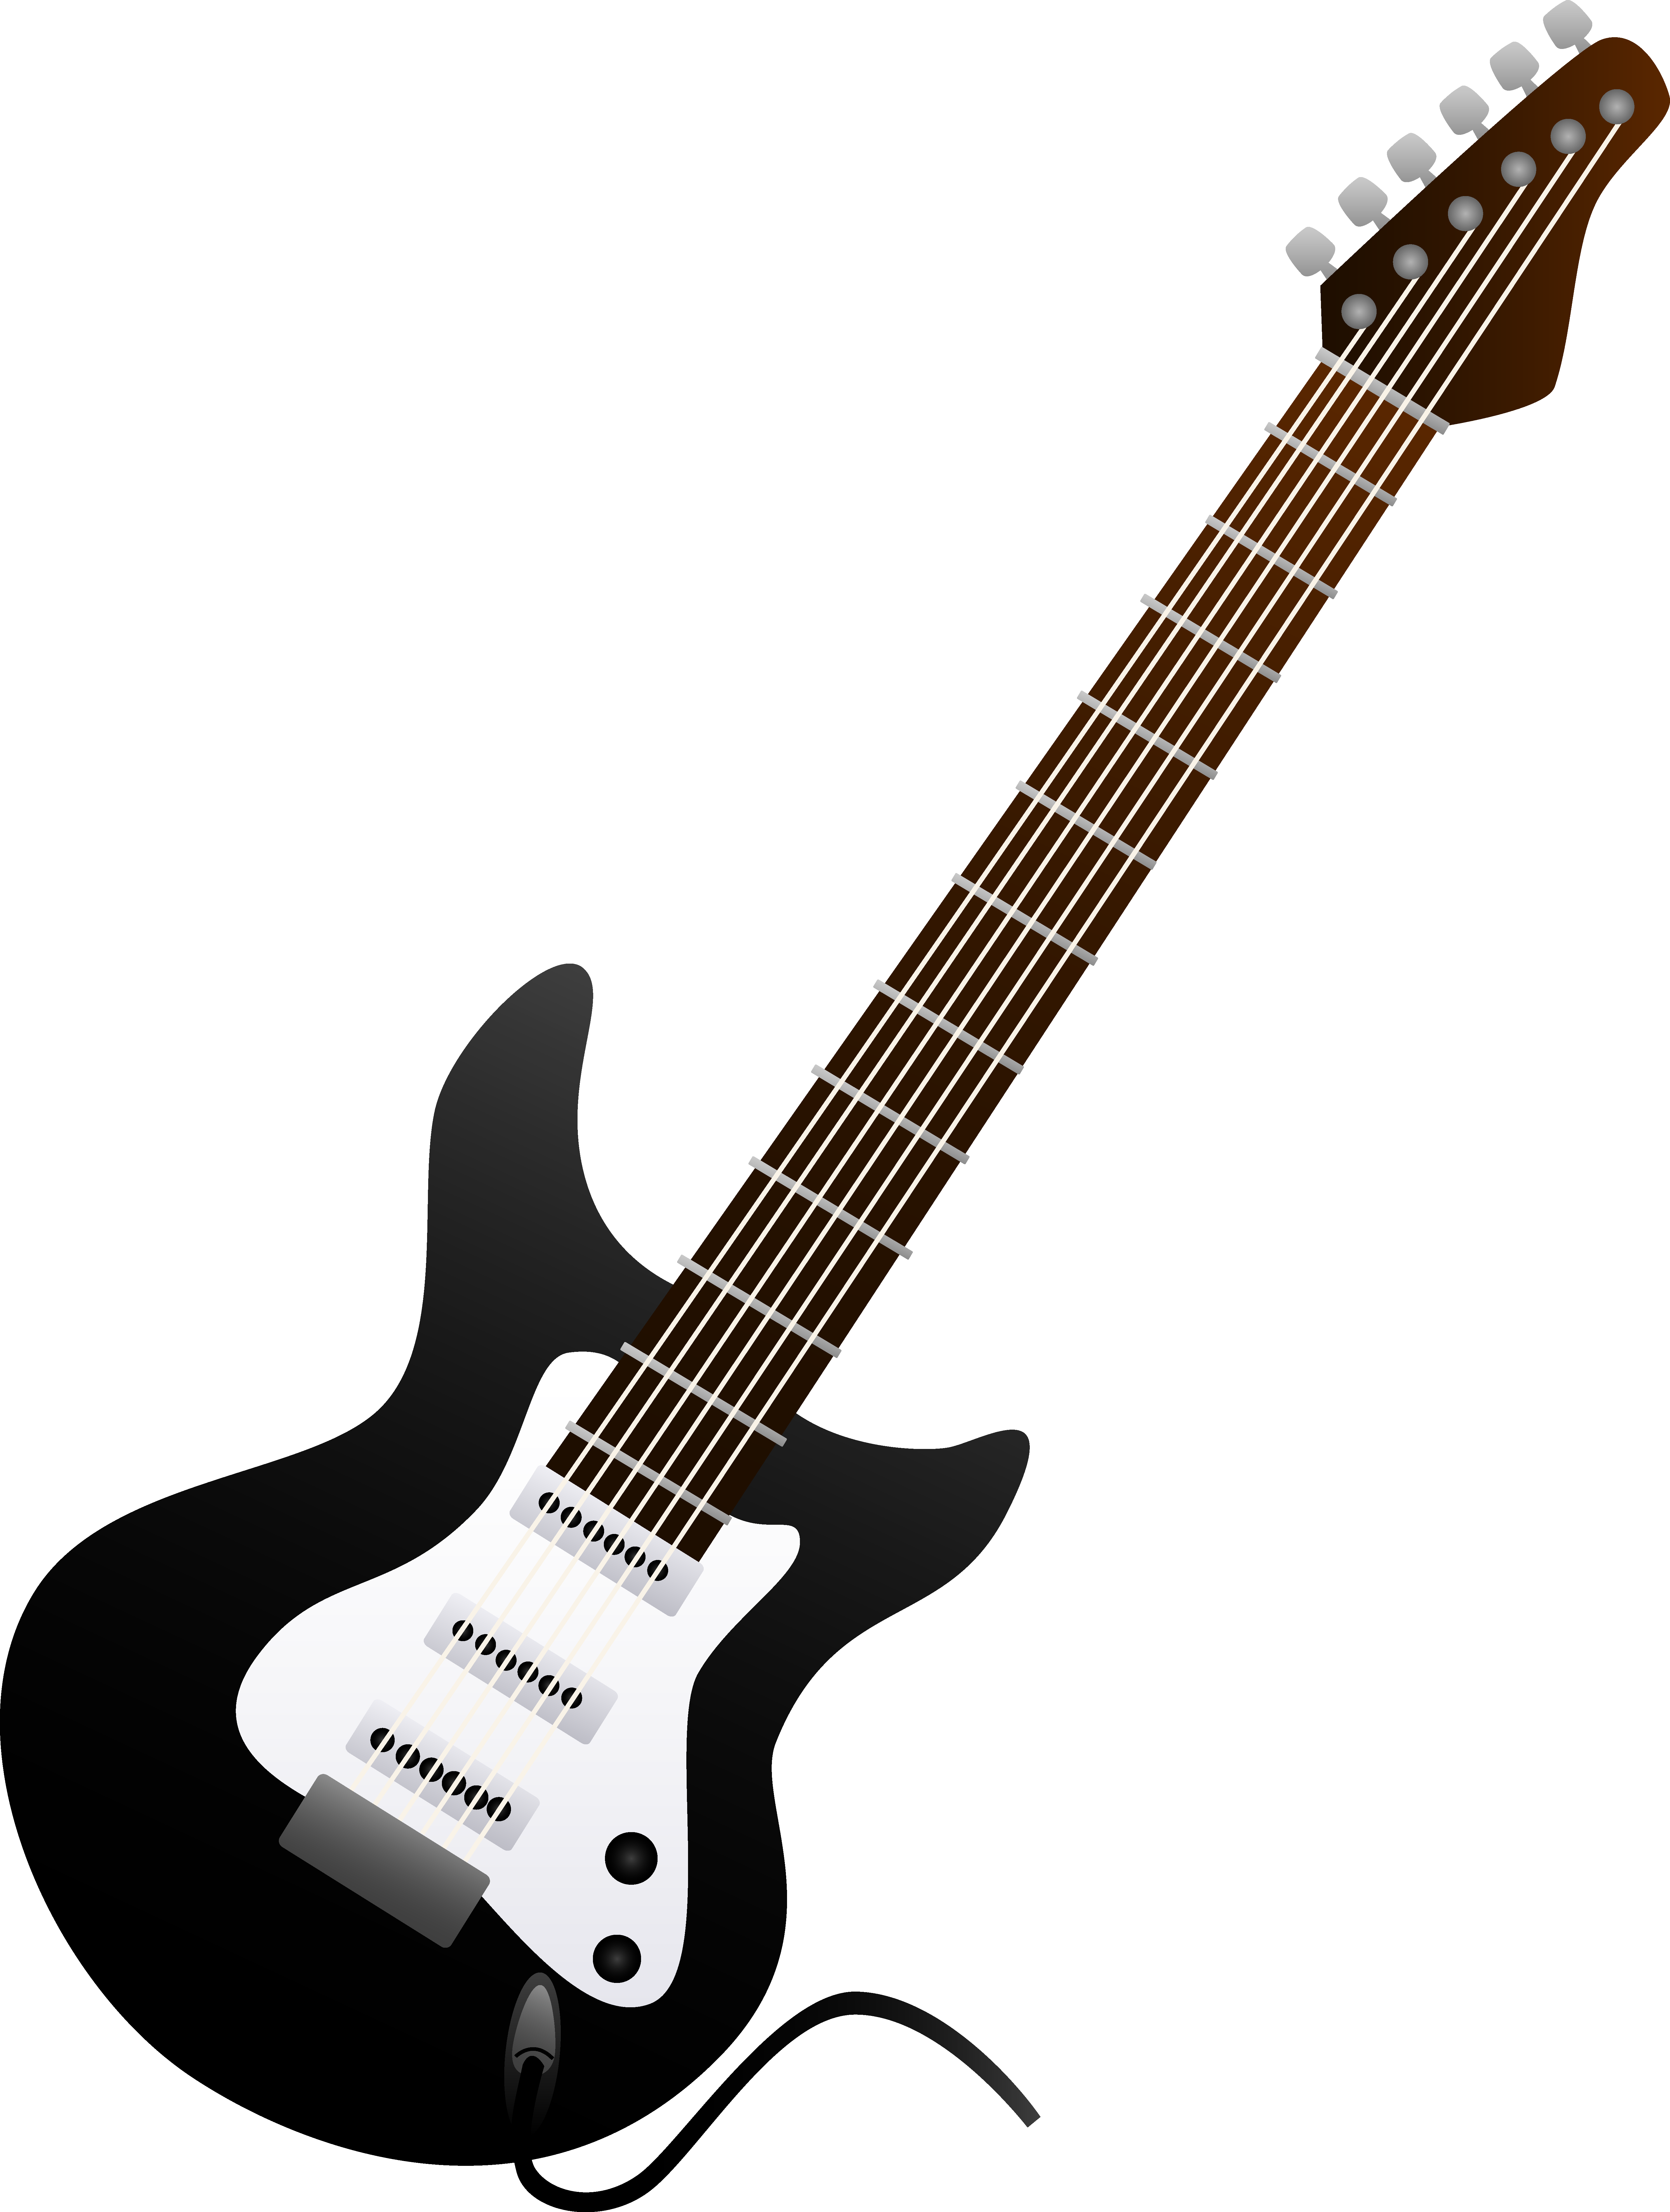 Bass Guitar Vector | Clipart library - Free Clipart Images